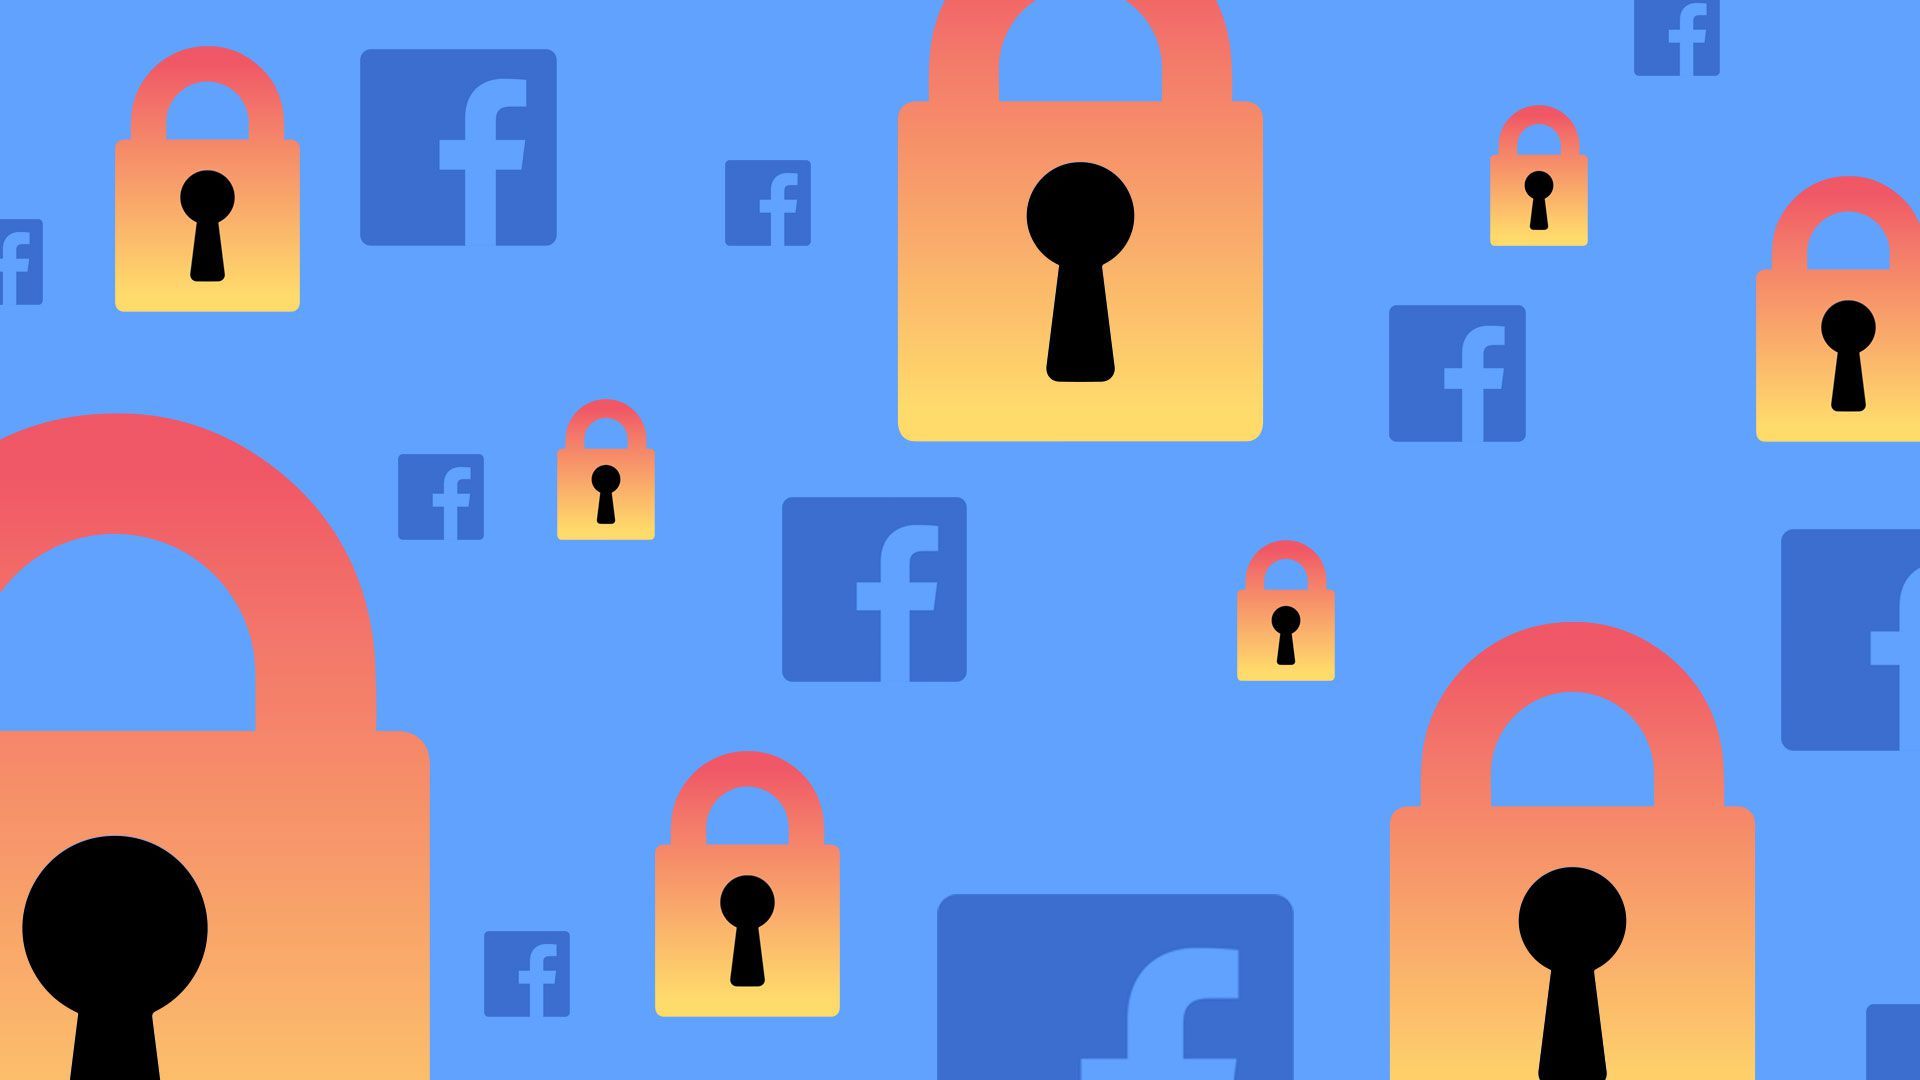 An image of floating padlocks and floating Facebook logos